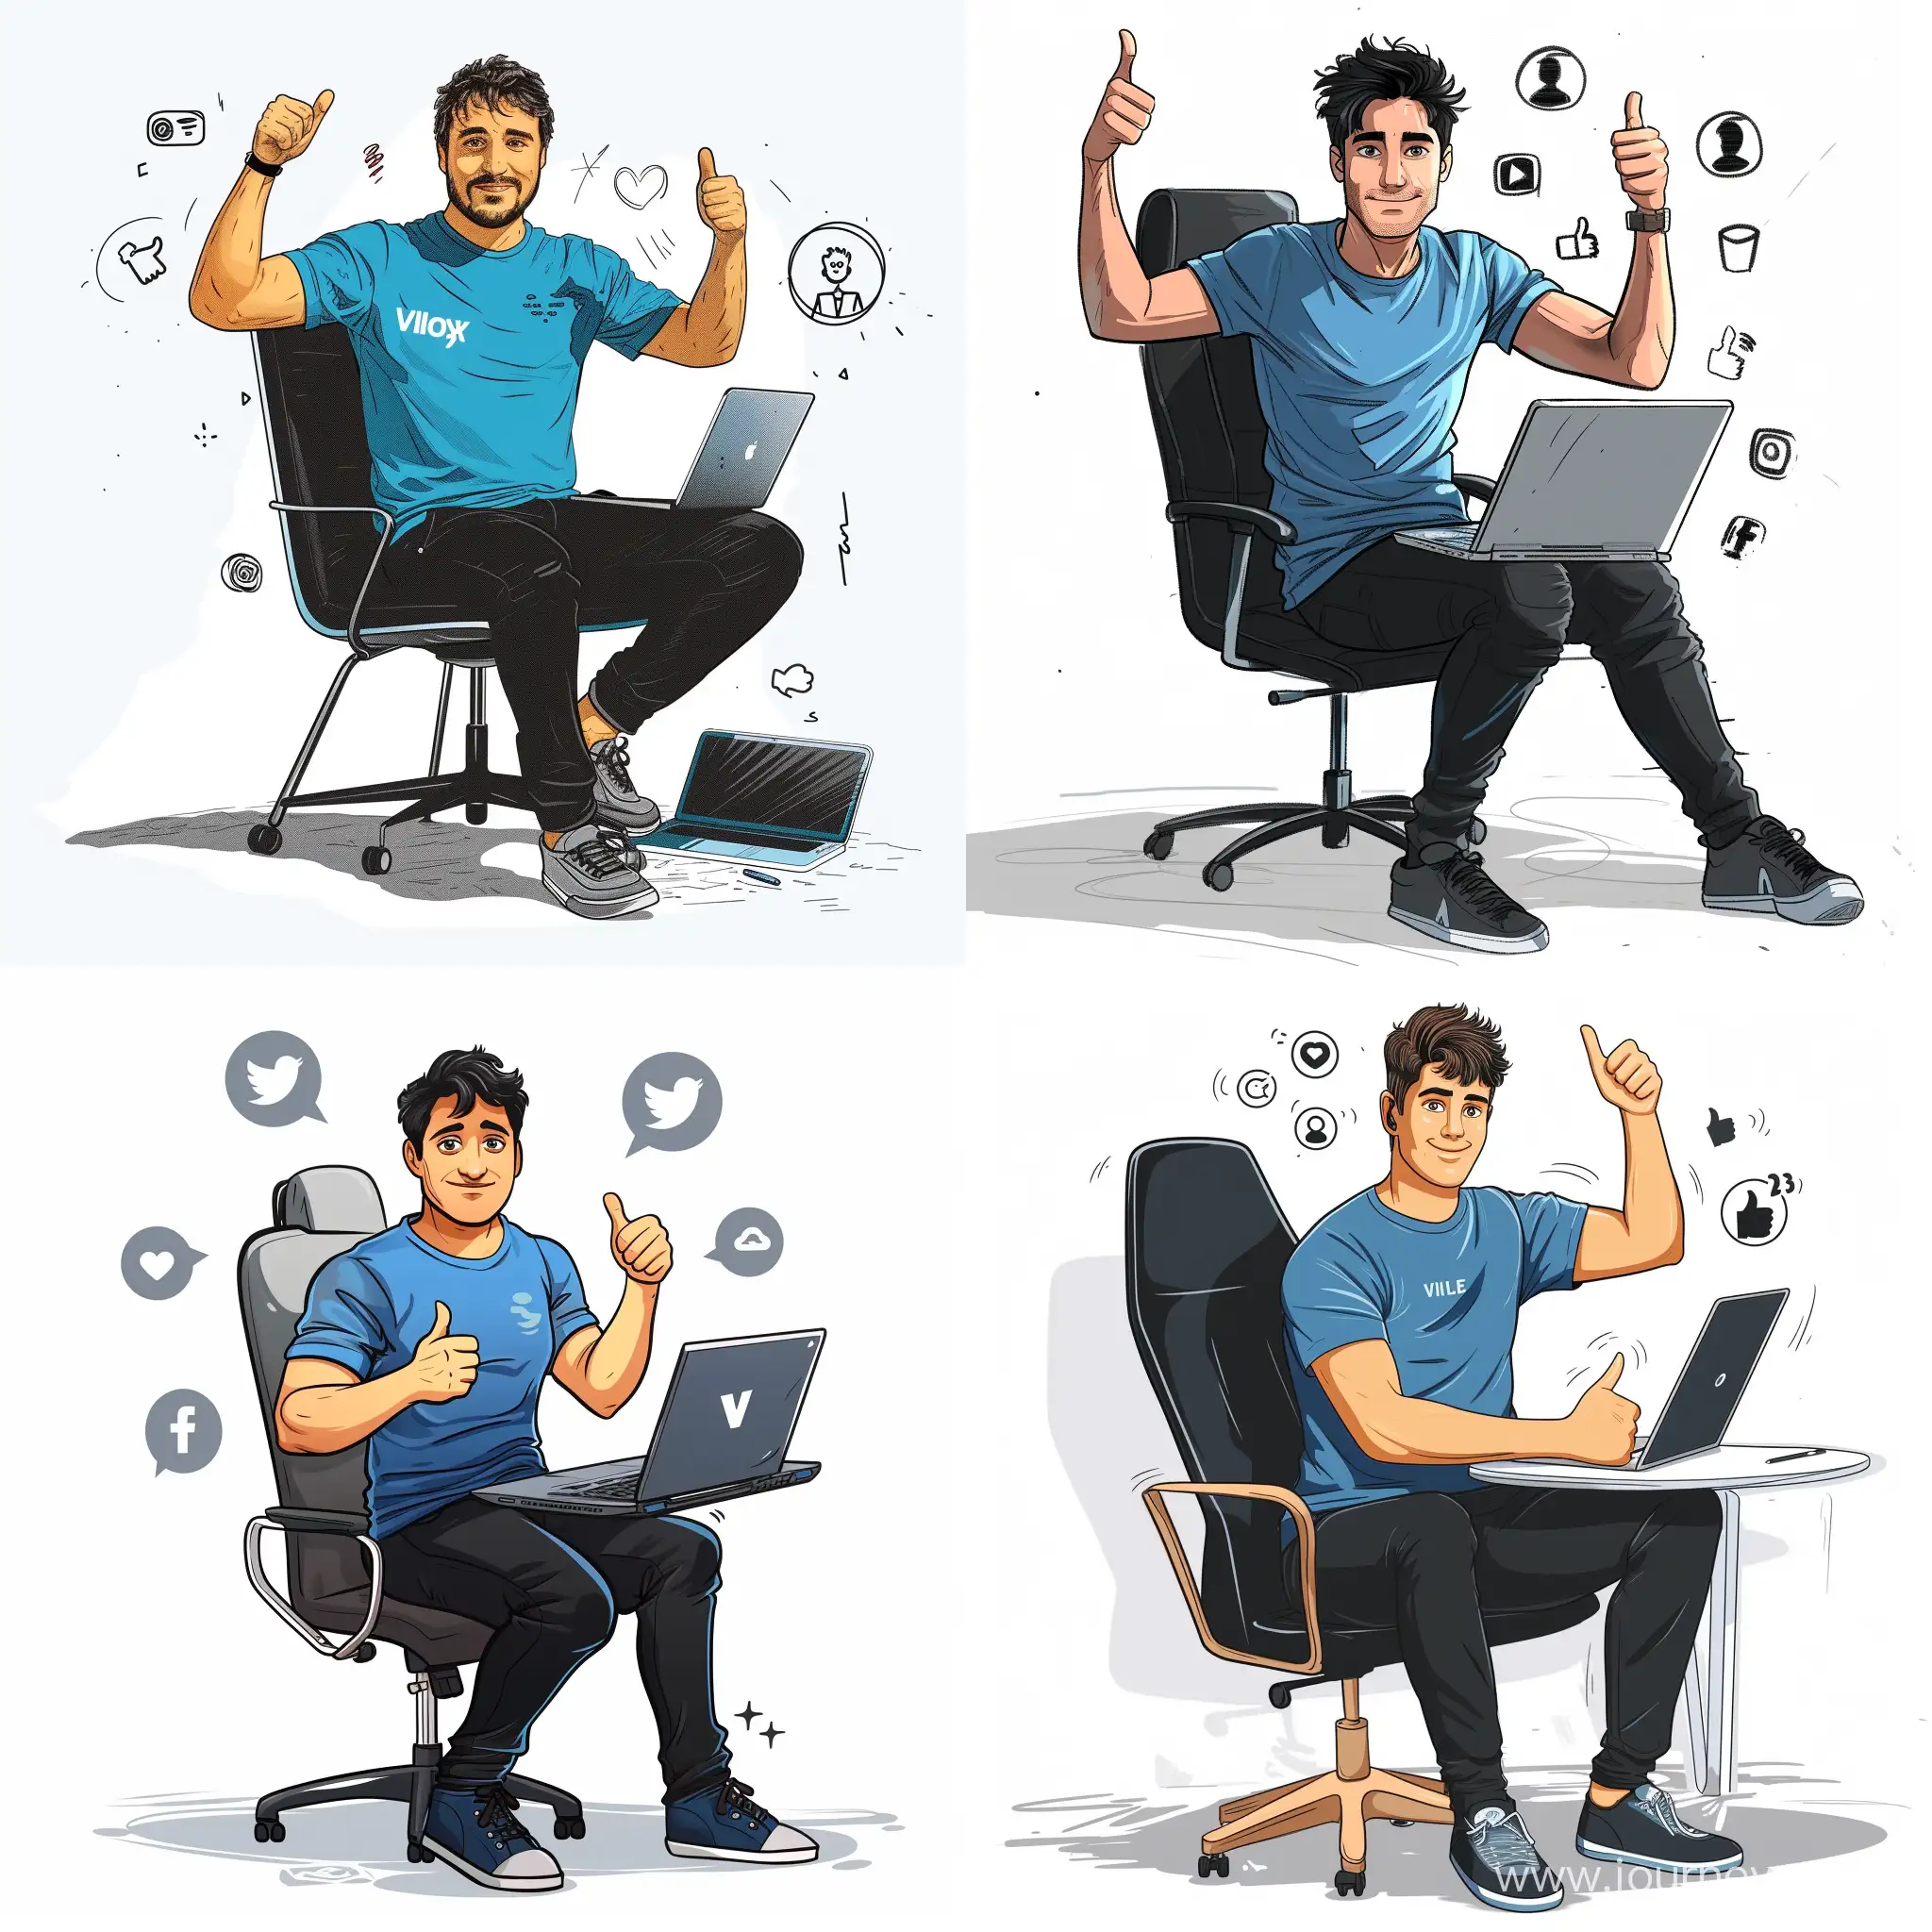 Young-Programmer-Giving-Thumbs-Up-with-Social-Media-Icons